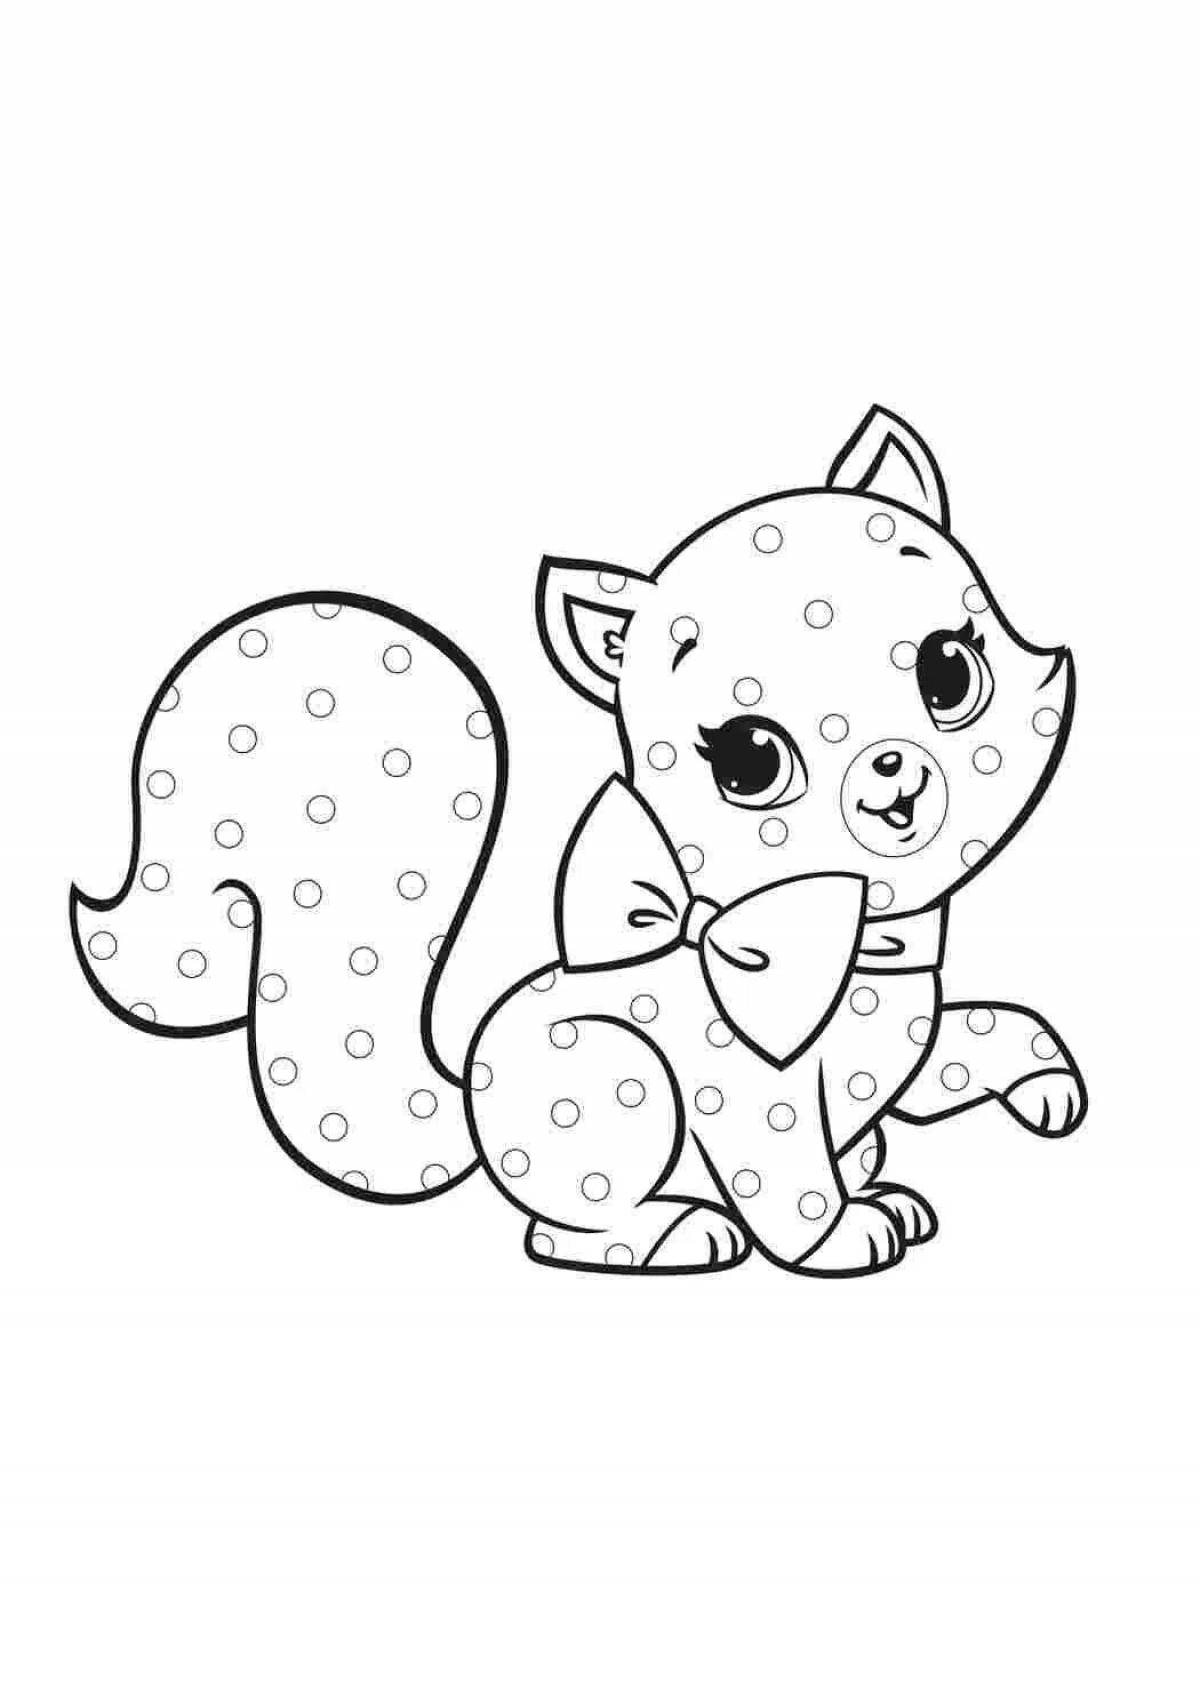 Cute and cute cat coloring book for kids